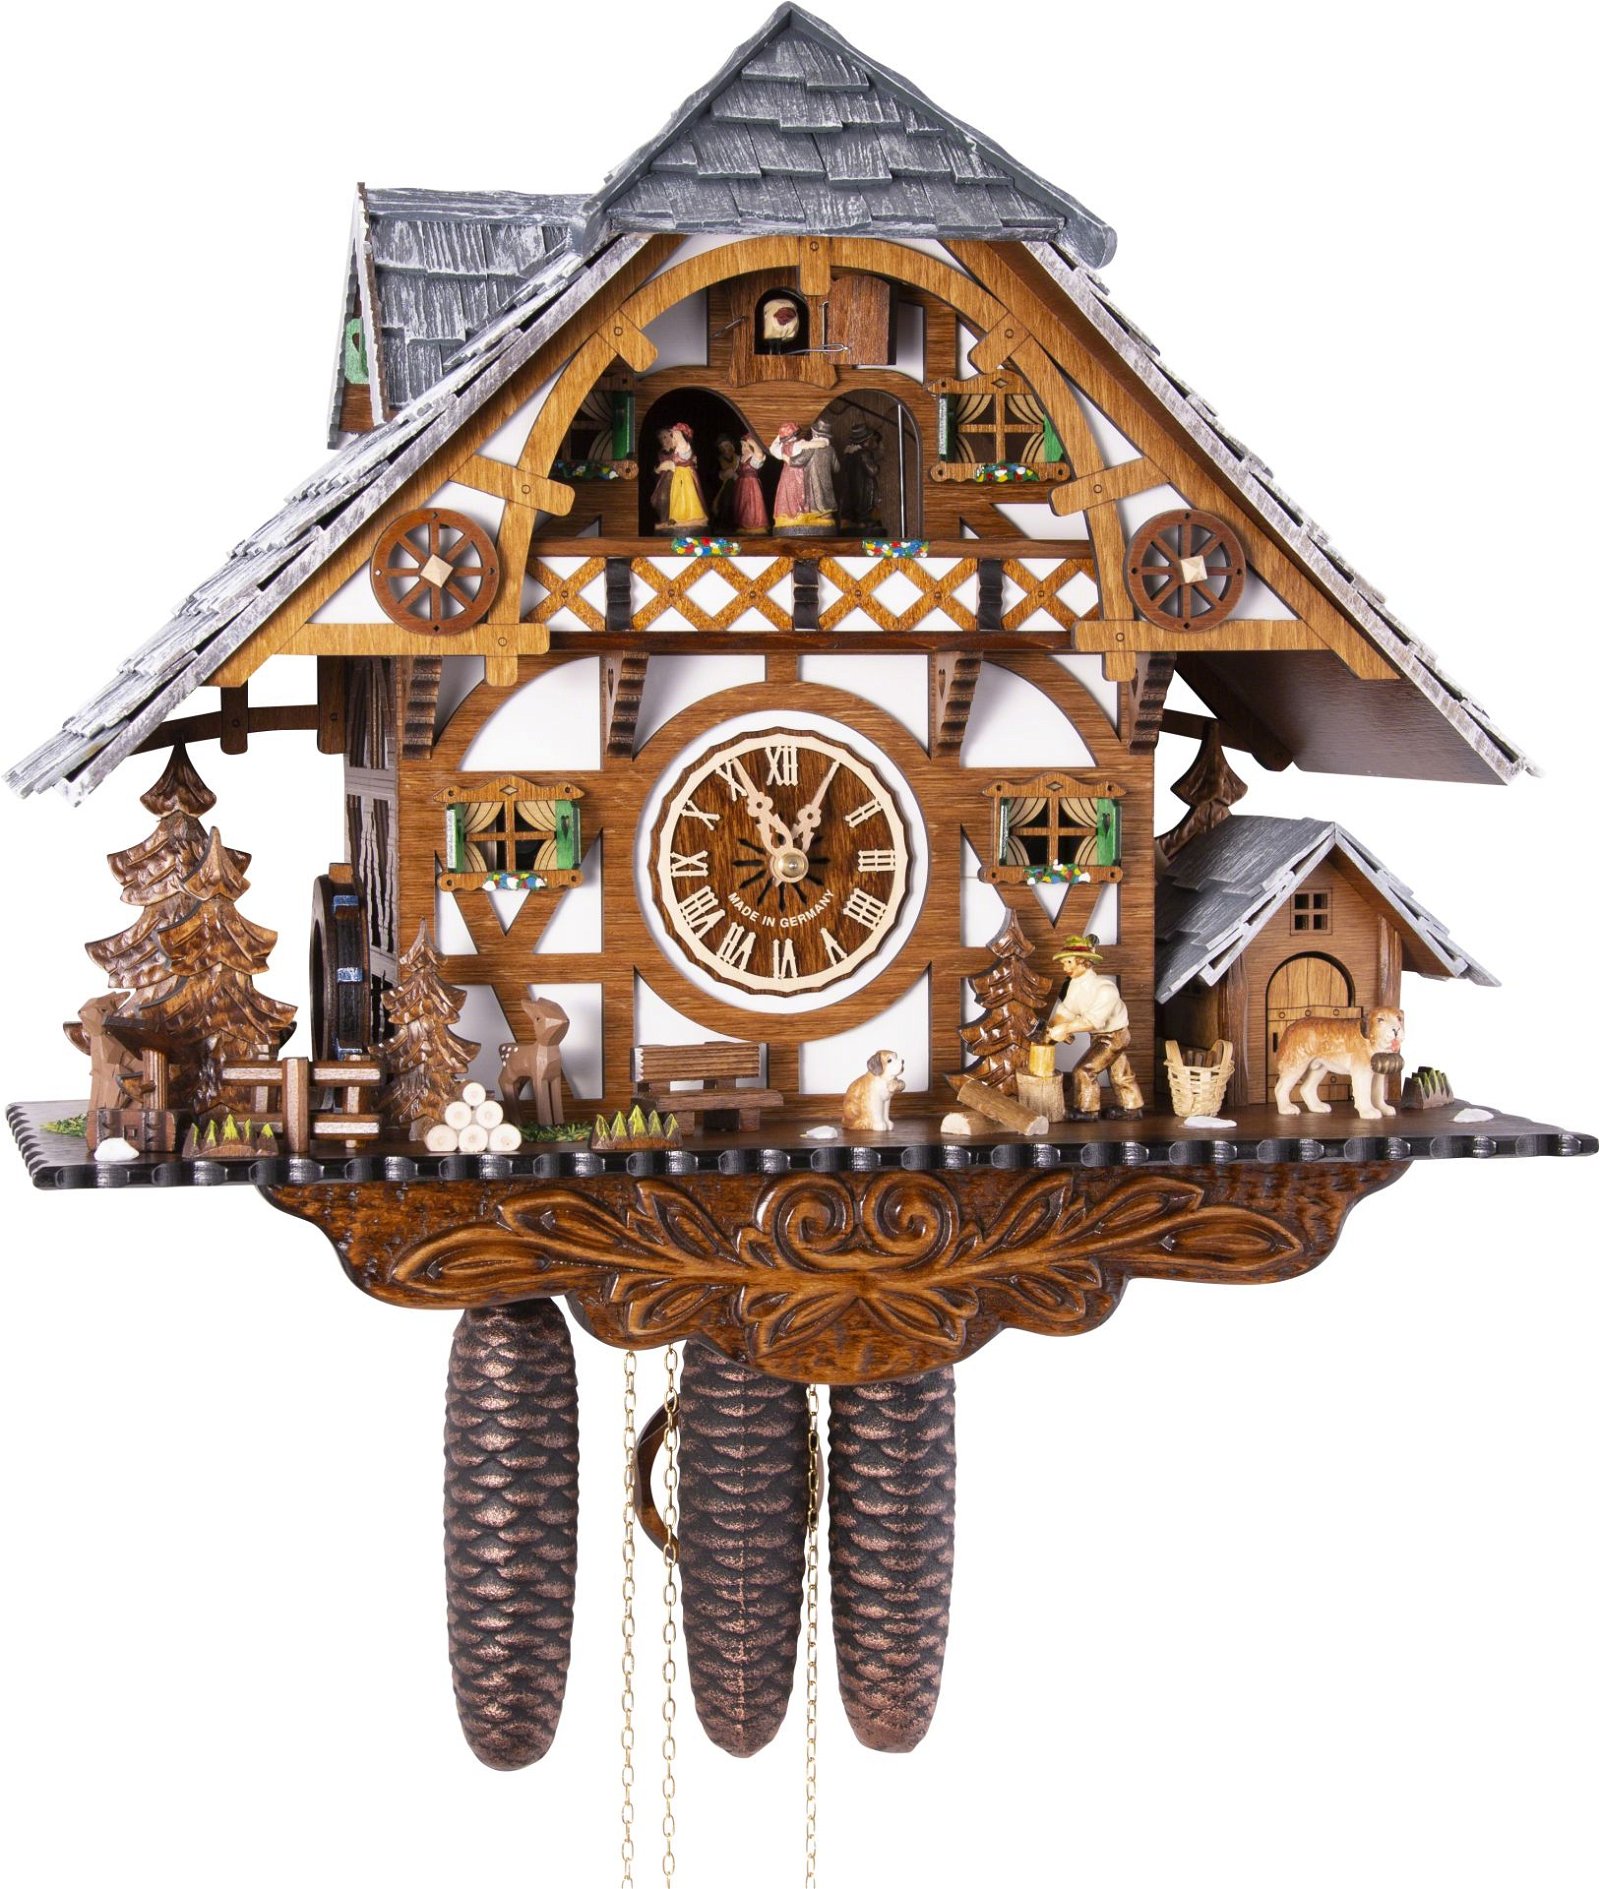 Cuckoo Clock Chalet Style 8 Day Movement 43cm by Engstler